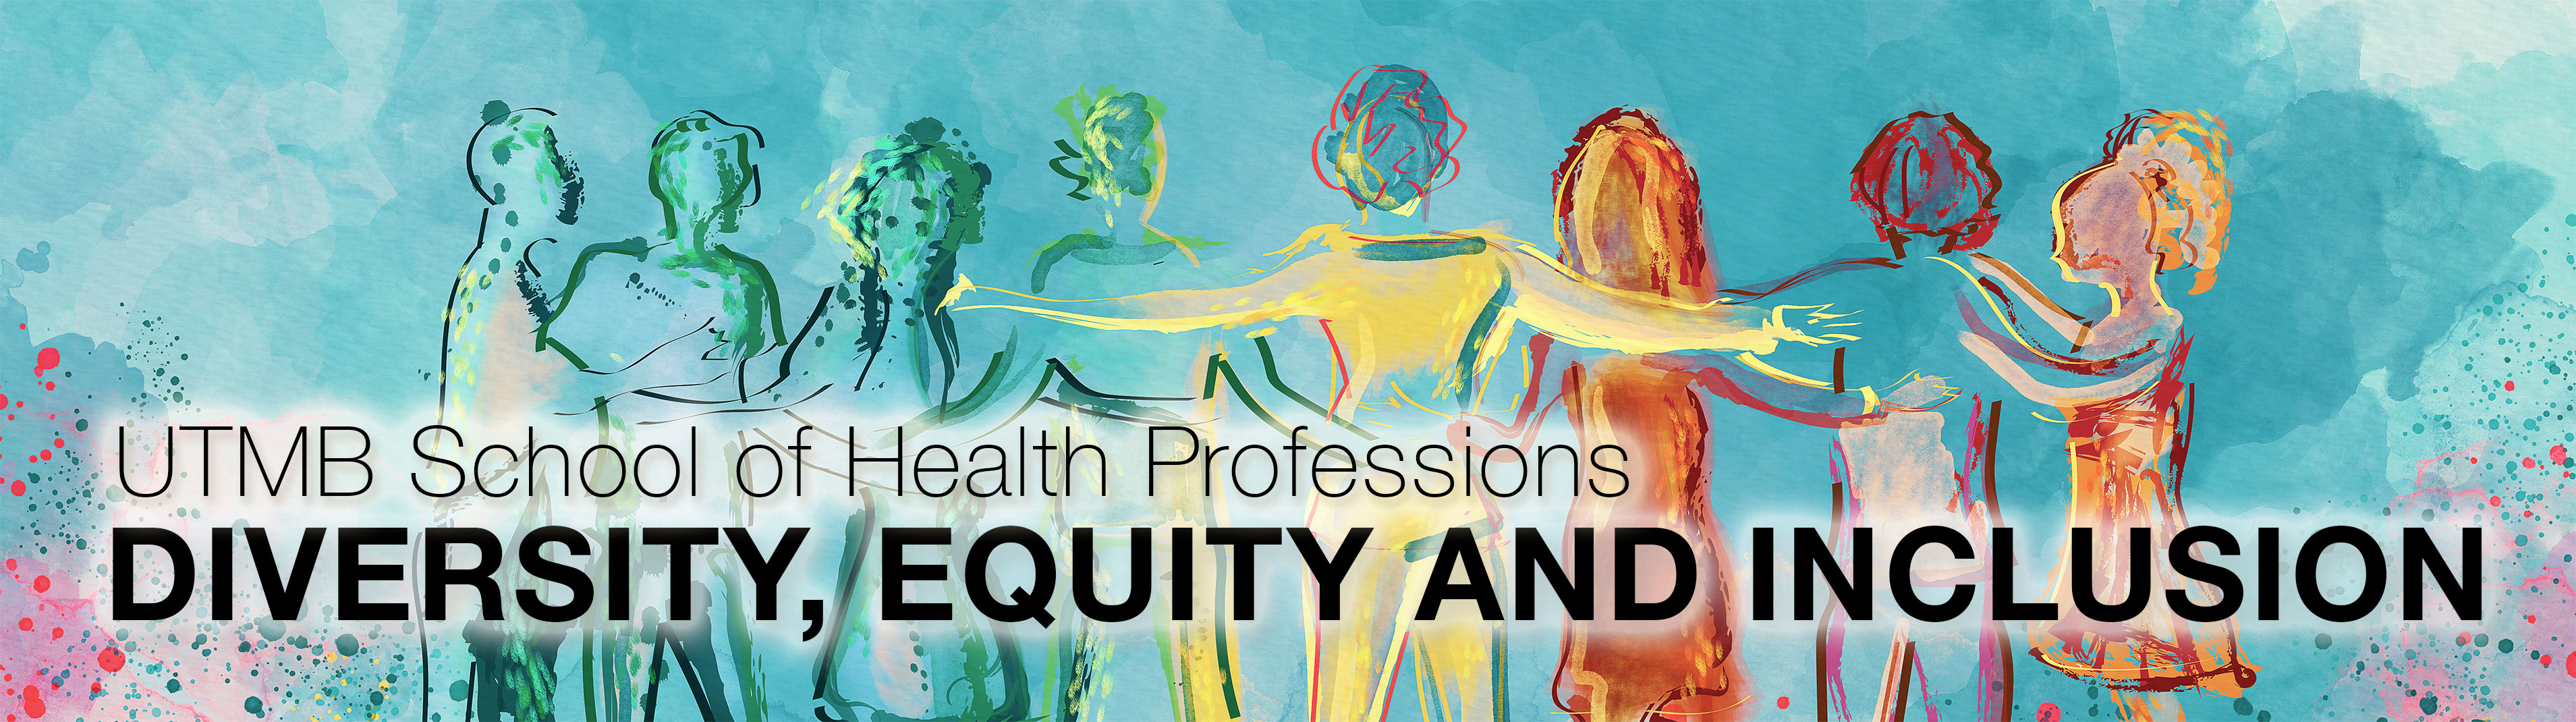 UTMB Health School of Health Professions Diversity, Equity and Inclusion